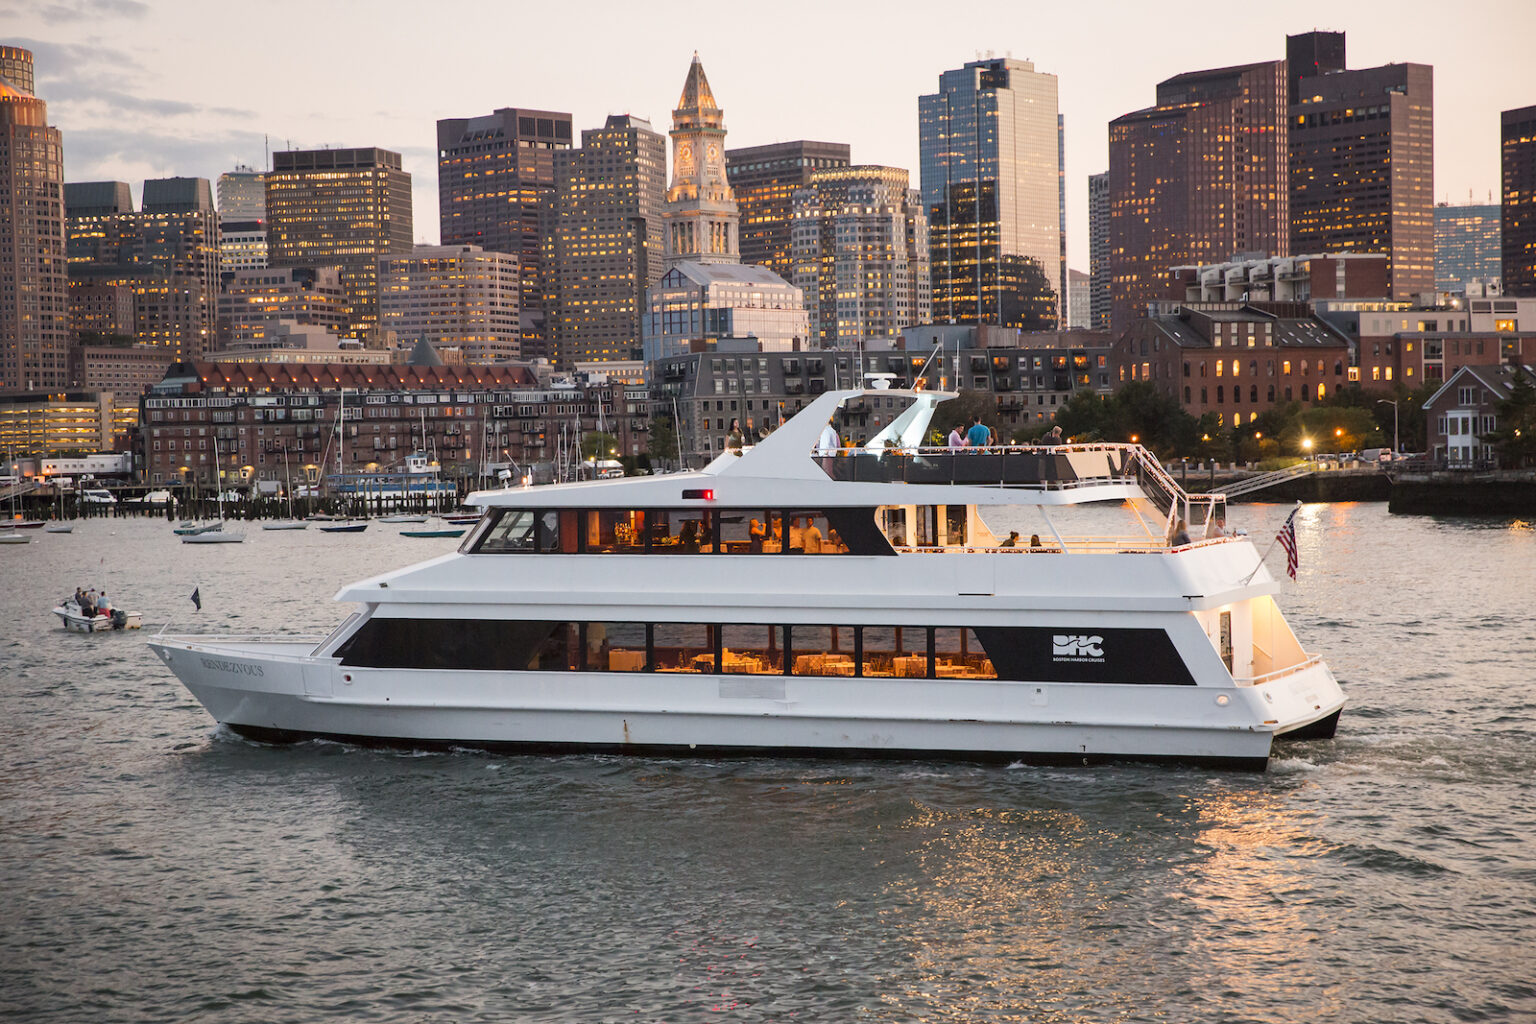 Boston Corporate Holiday Party Venues on a Boat with City Cruises